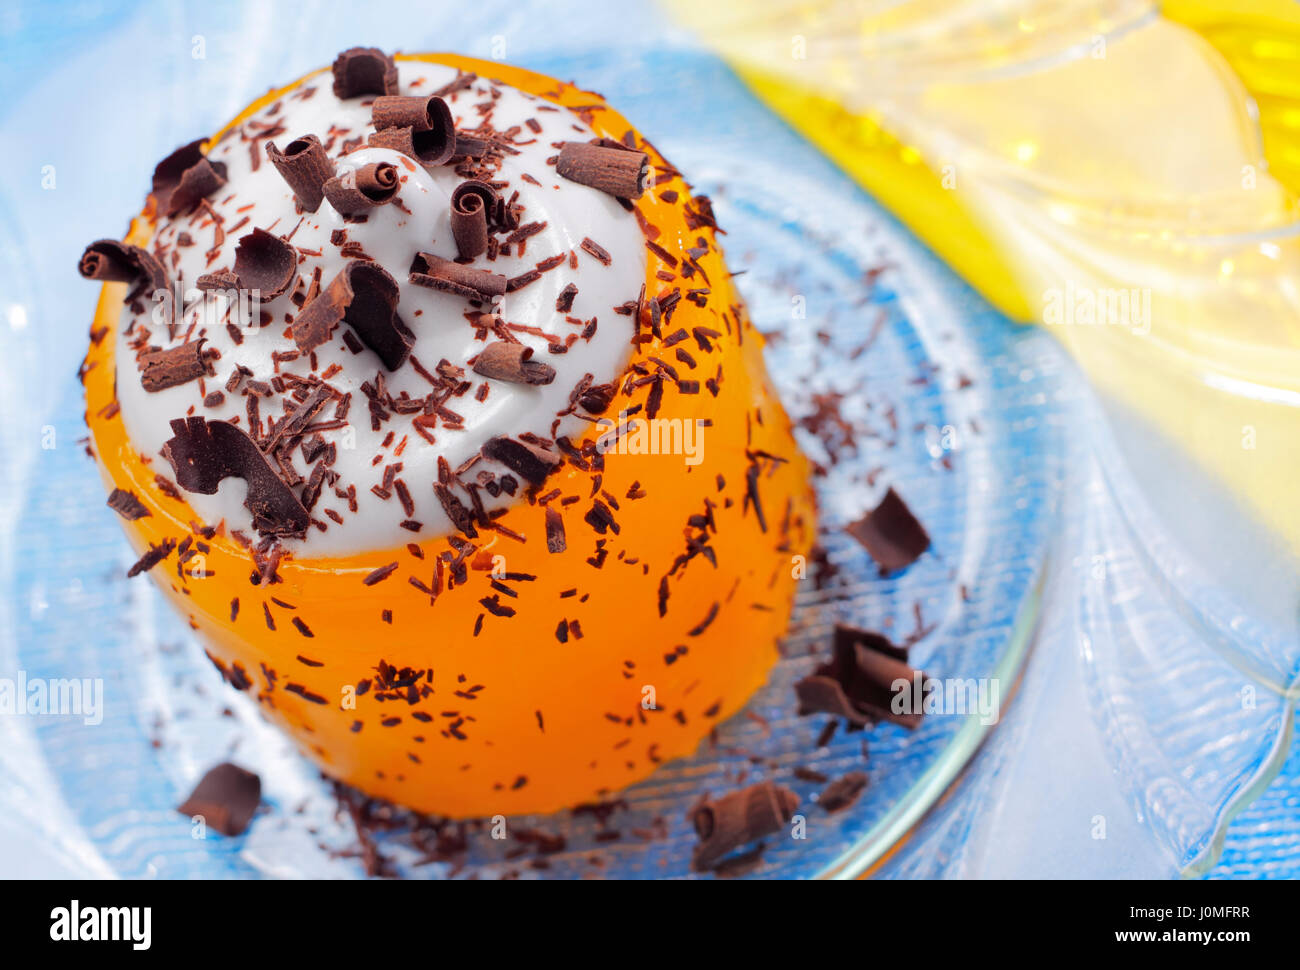 Pumpkin jelly with whipped cream and chocolate curls. Focus on whipped cream with chocolate garnish. Stock Photo